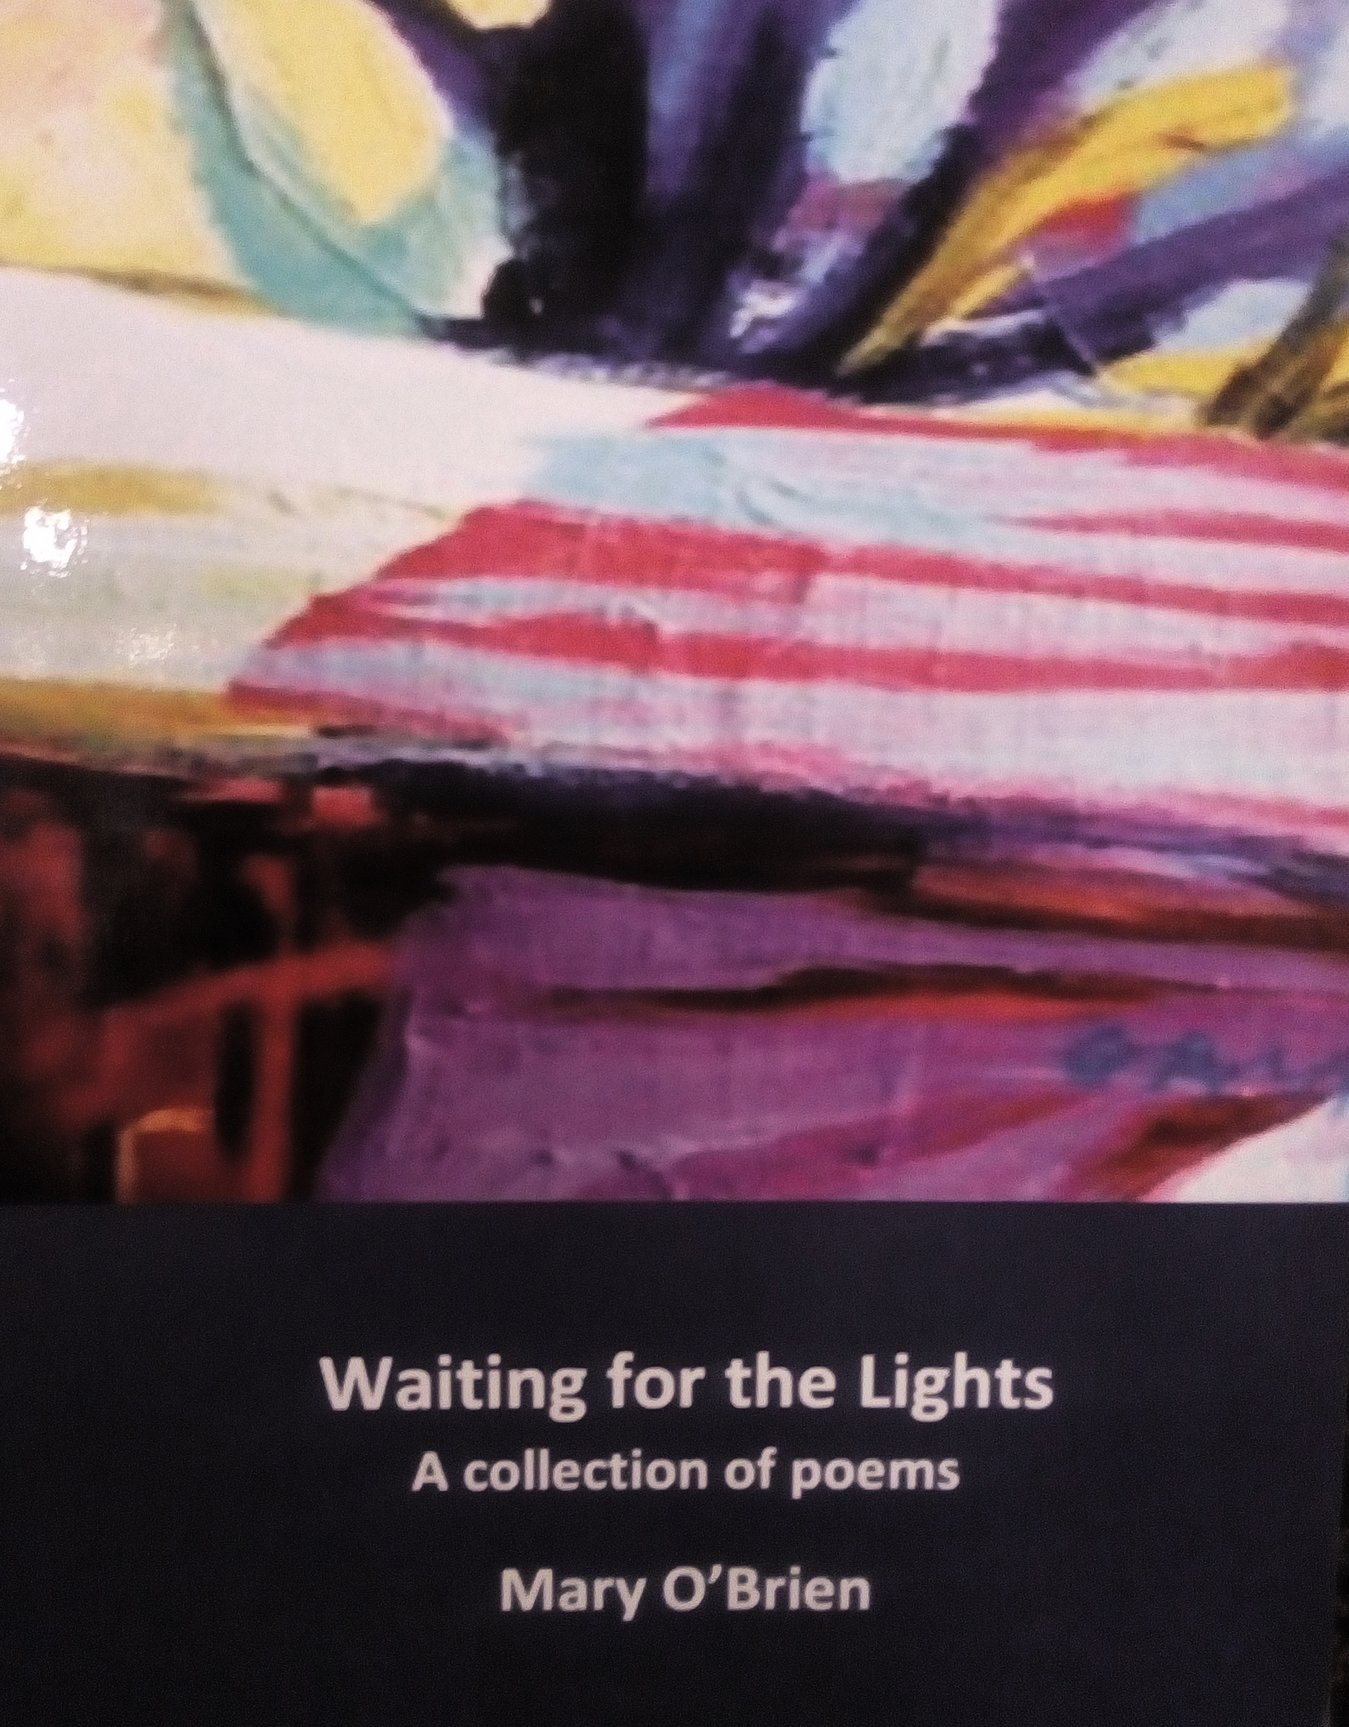 Waiting For The Lights by Mary O'Brien